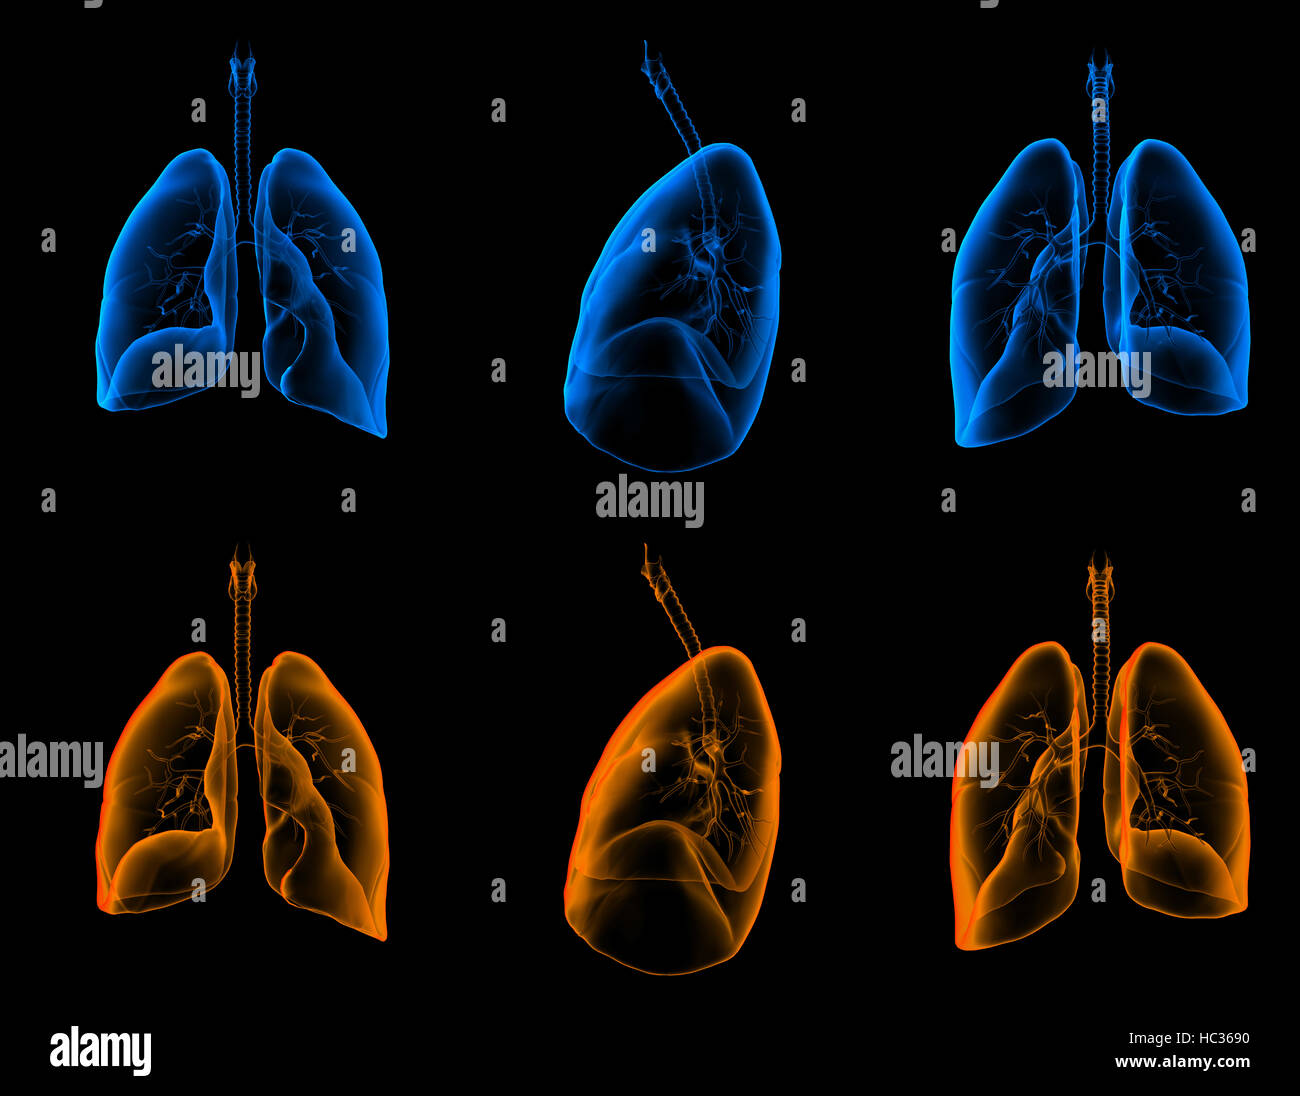 3D medical illustration of the lungs Stock Photo